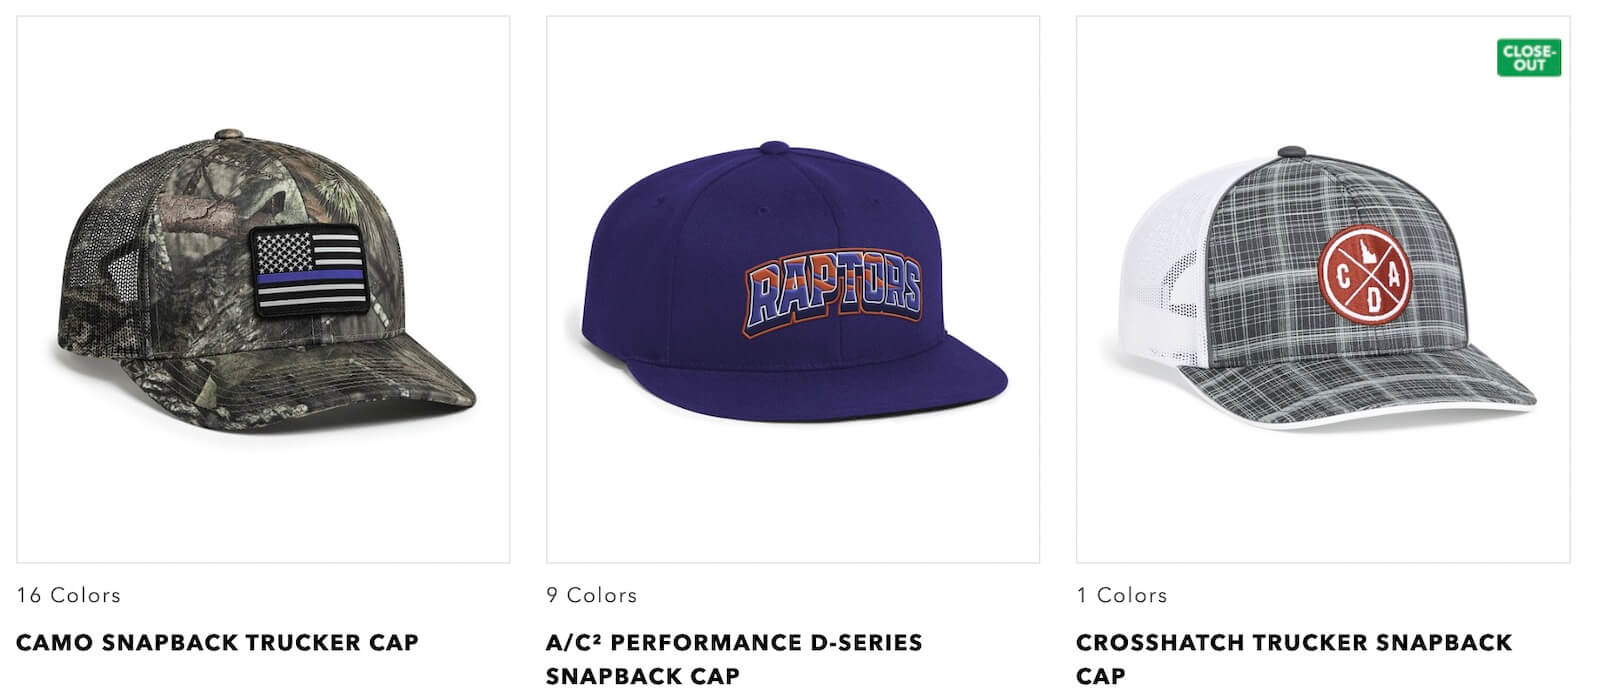 pacific headwear caps with snapback closure